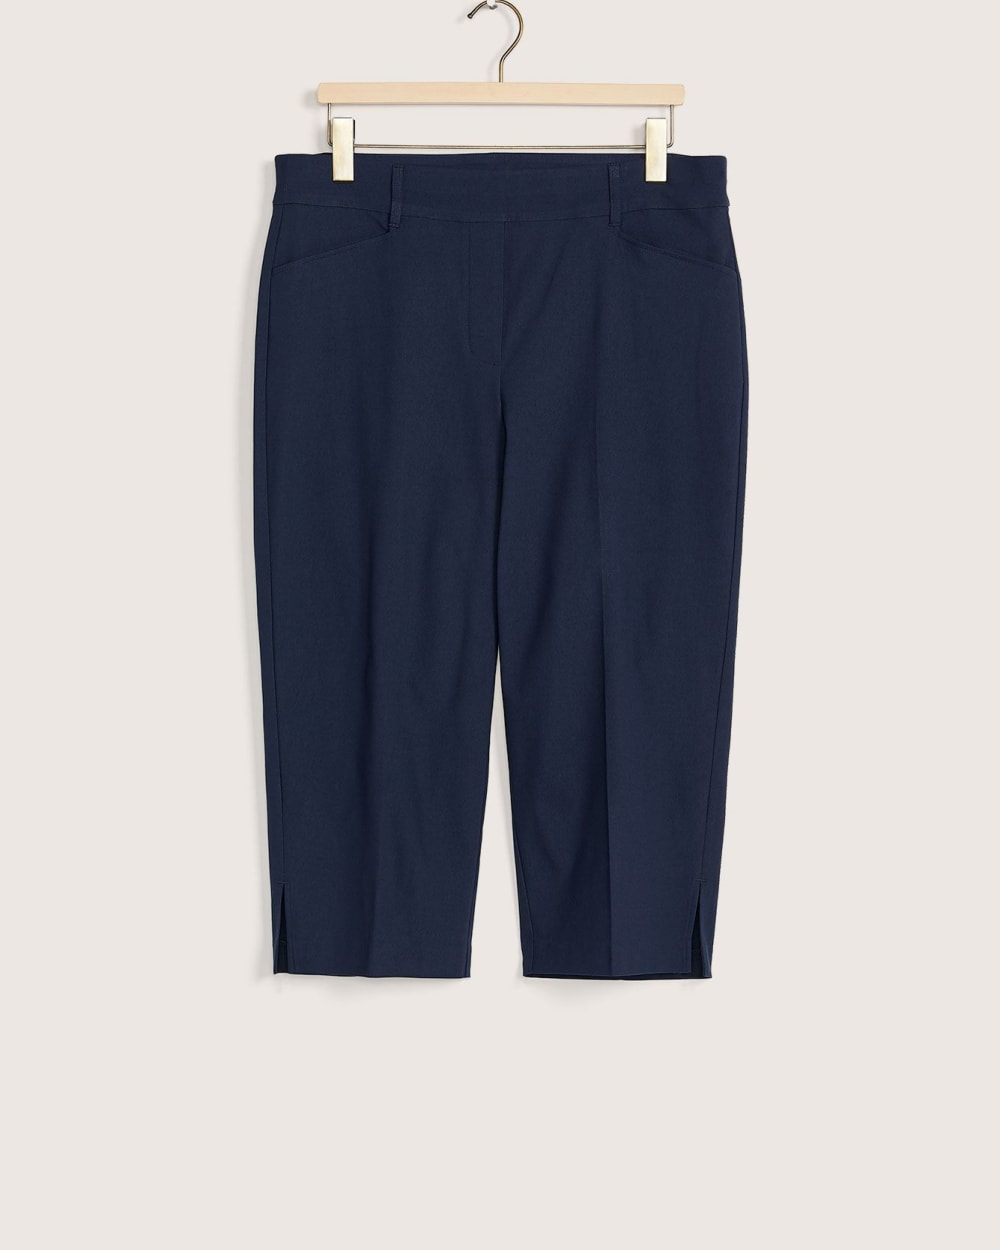 Responsible, Savvy Fit Capri Pants With Pockets - In Every Story